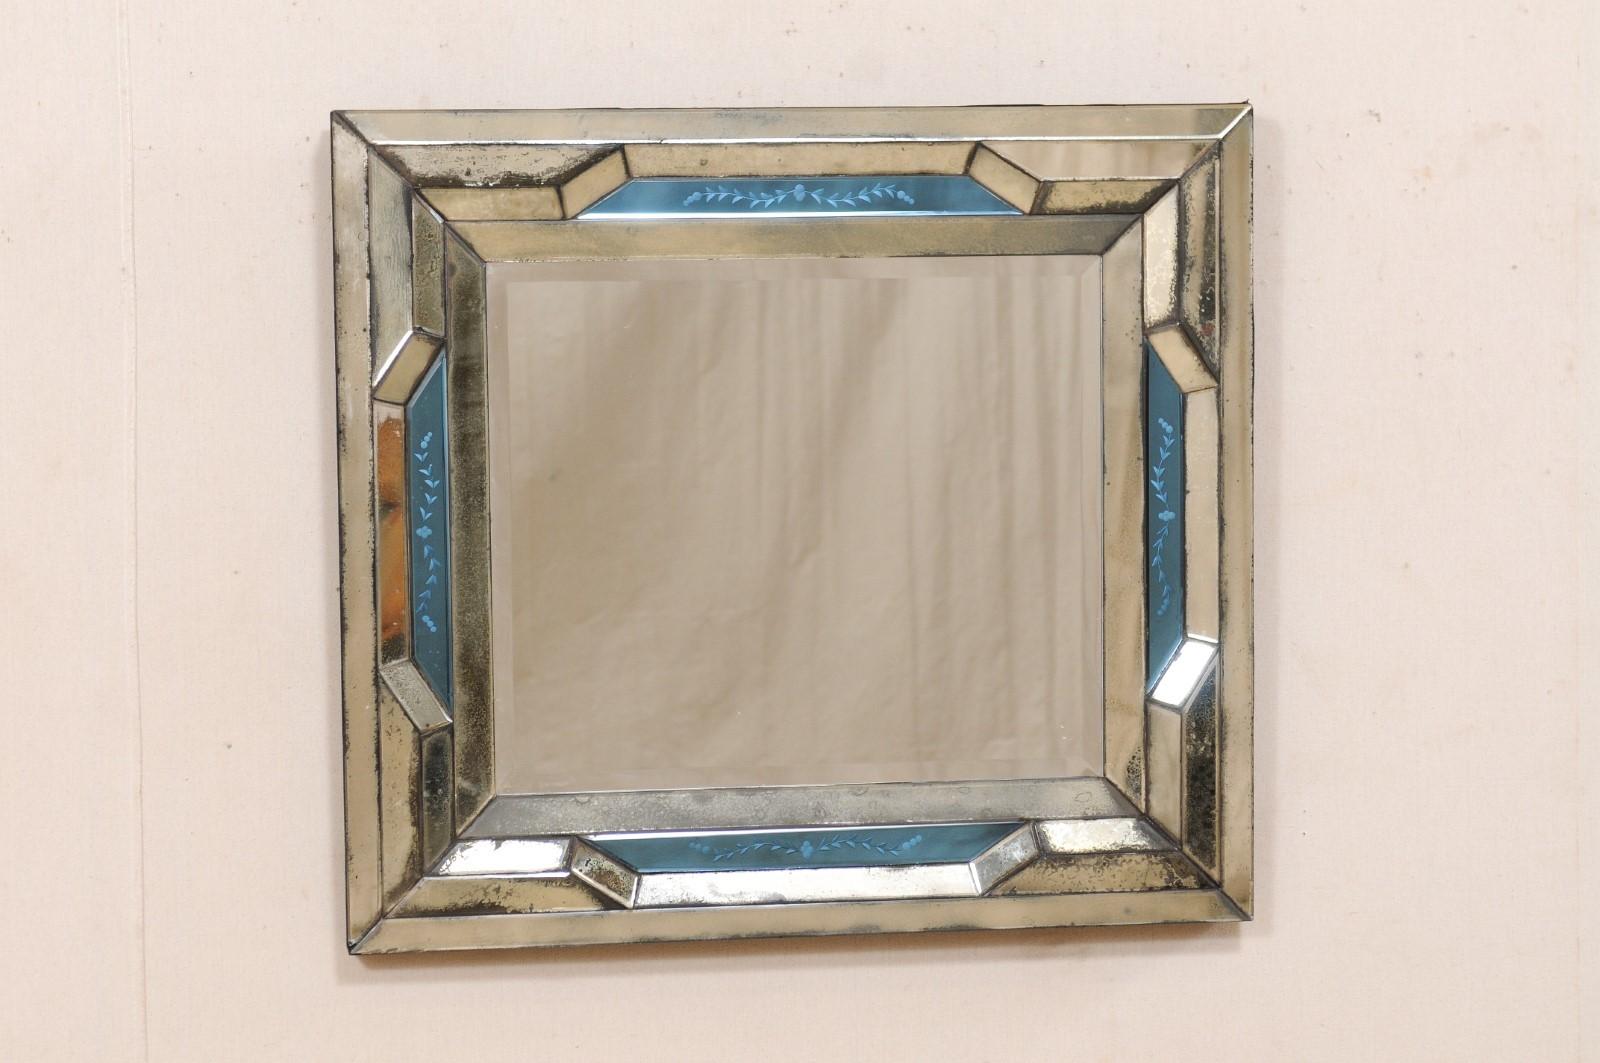 An Italian Venetian-style mirror with blue accents from the 20th century. This vintage mirror from Italy is near-square in shape and features a beveled center mirror, which is framed within a mirrored frame that has a heavier silvered/antiqued